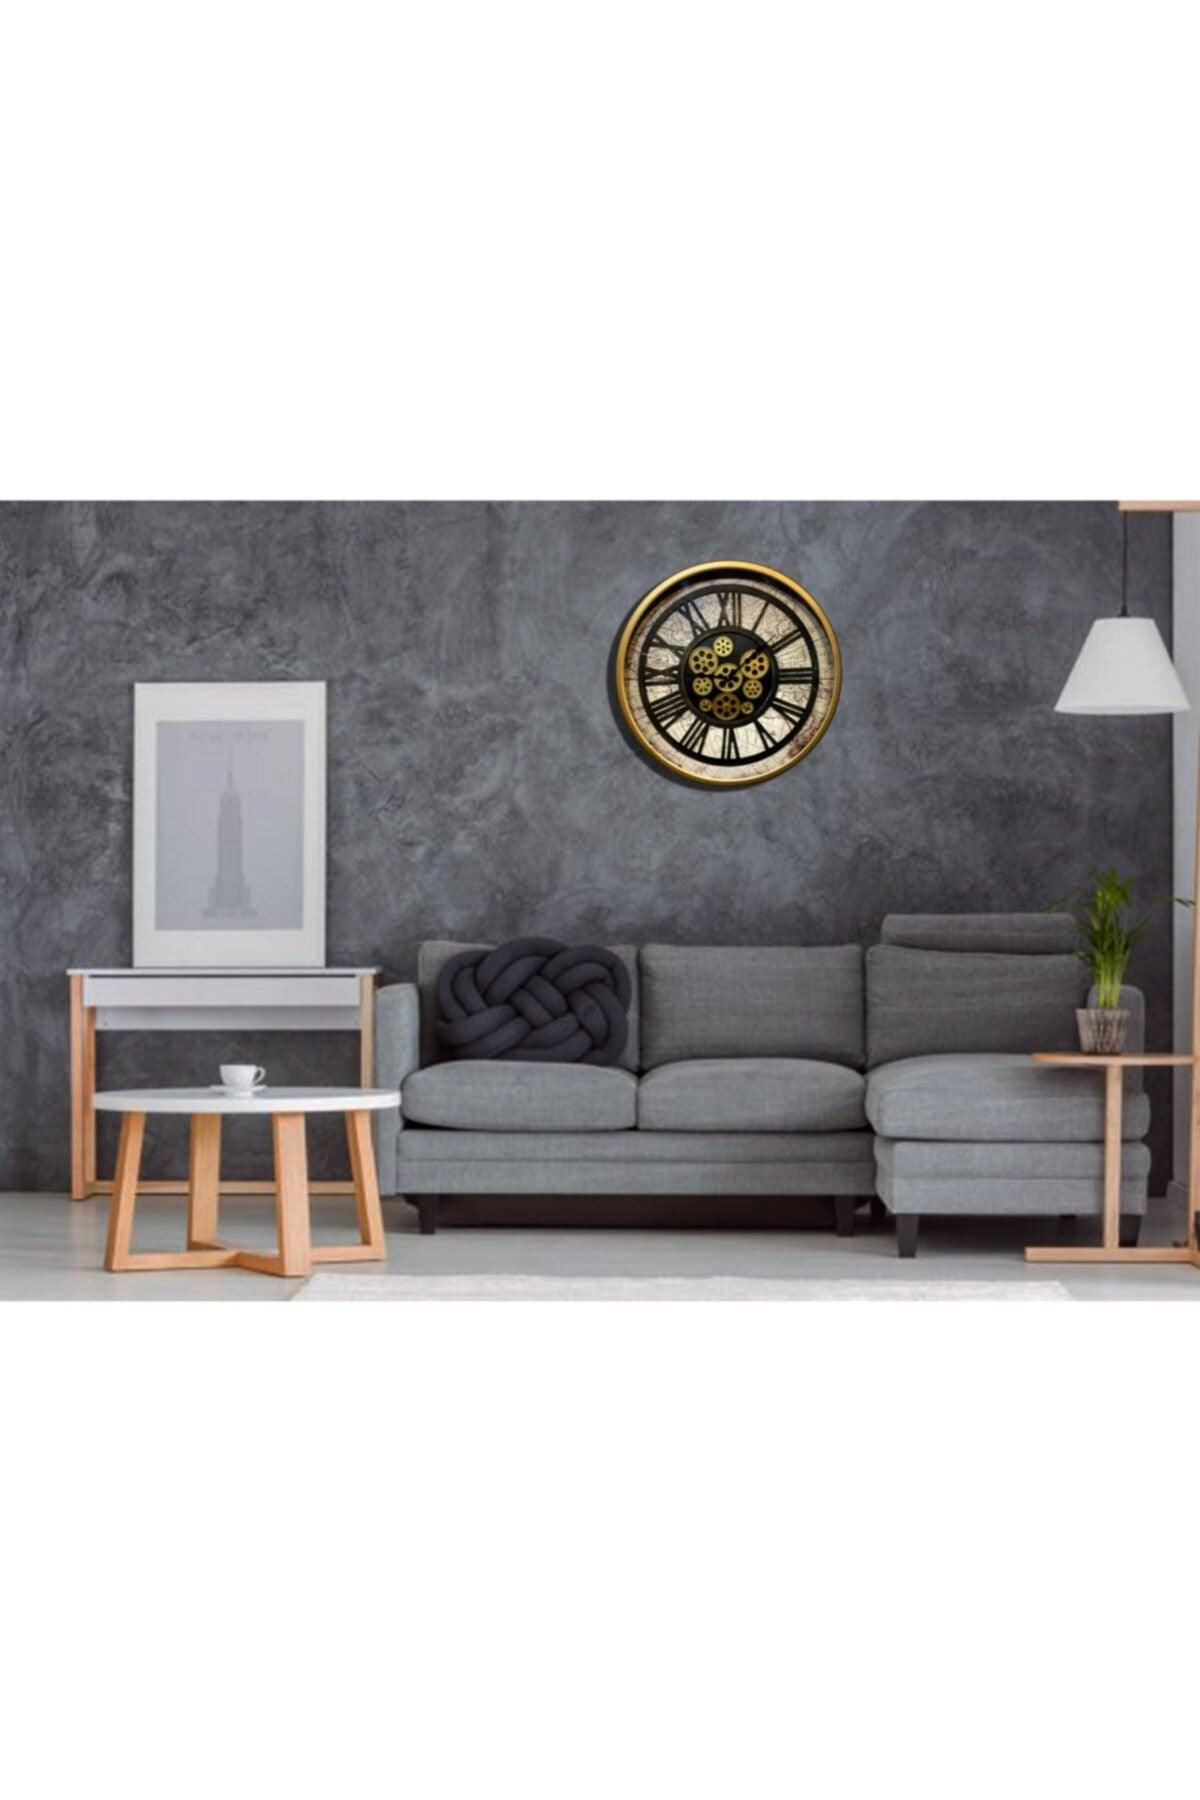 Rustic Wall Clock with Metal Oven Painted Glass and Active Wheel - Swordslife